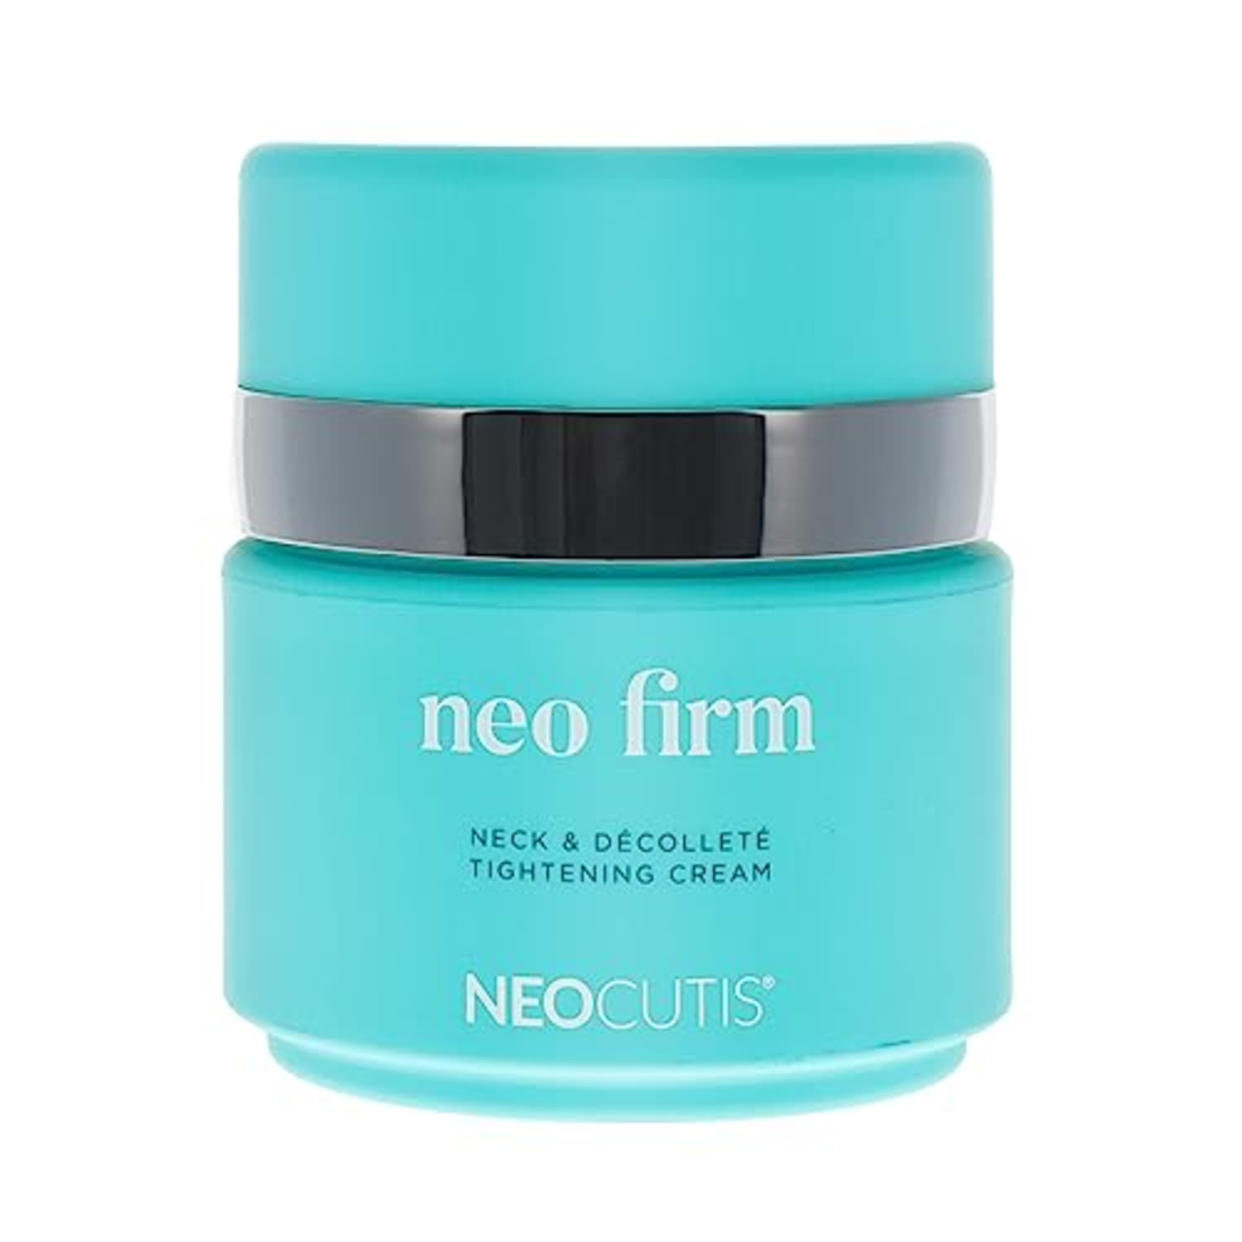 Neocutis Neo Firm - Neck and Décolleté Firming Cream - Skin Tightening and Anti-Aging - 50ml (AMAZON)